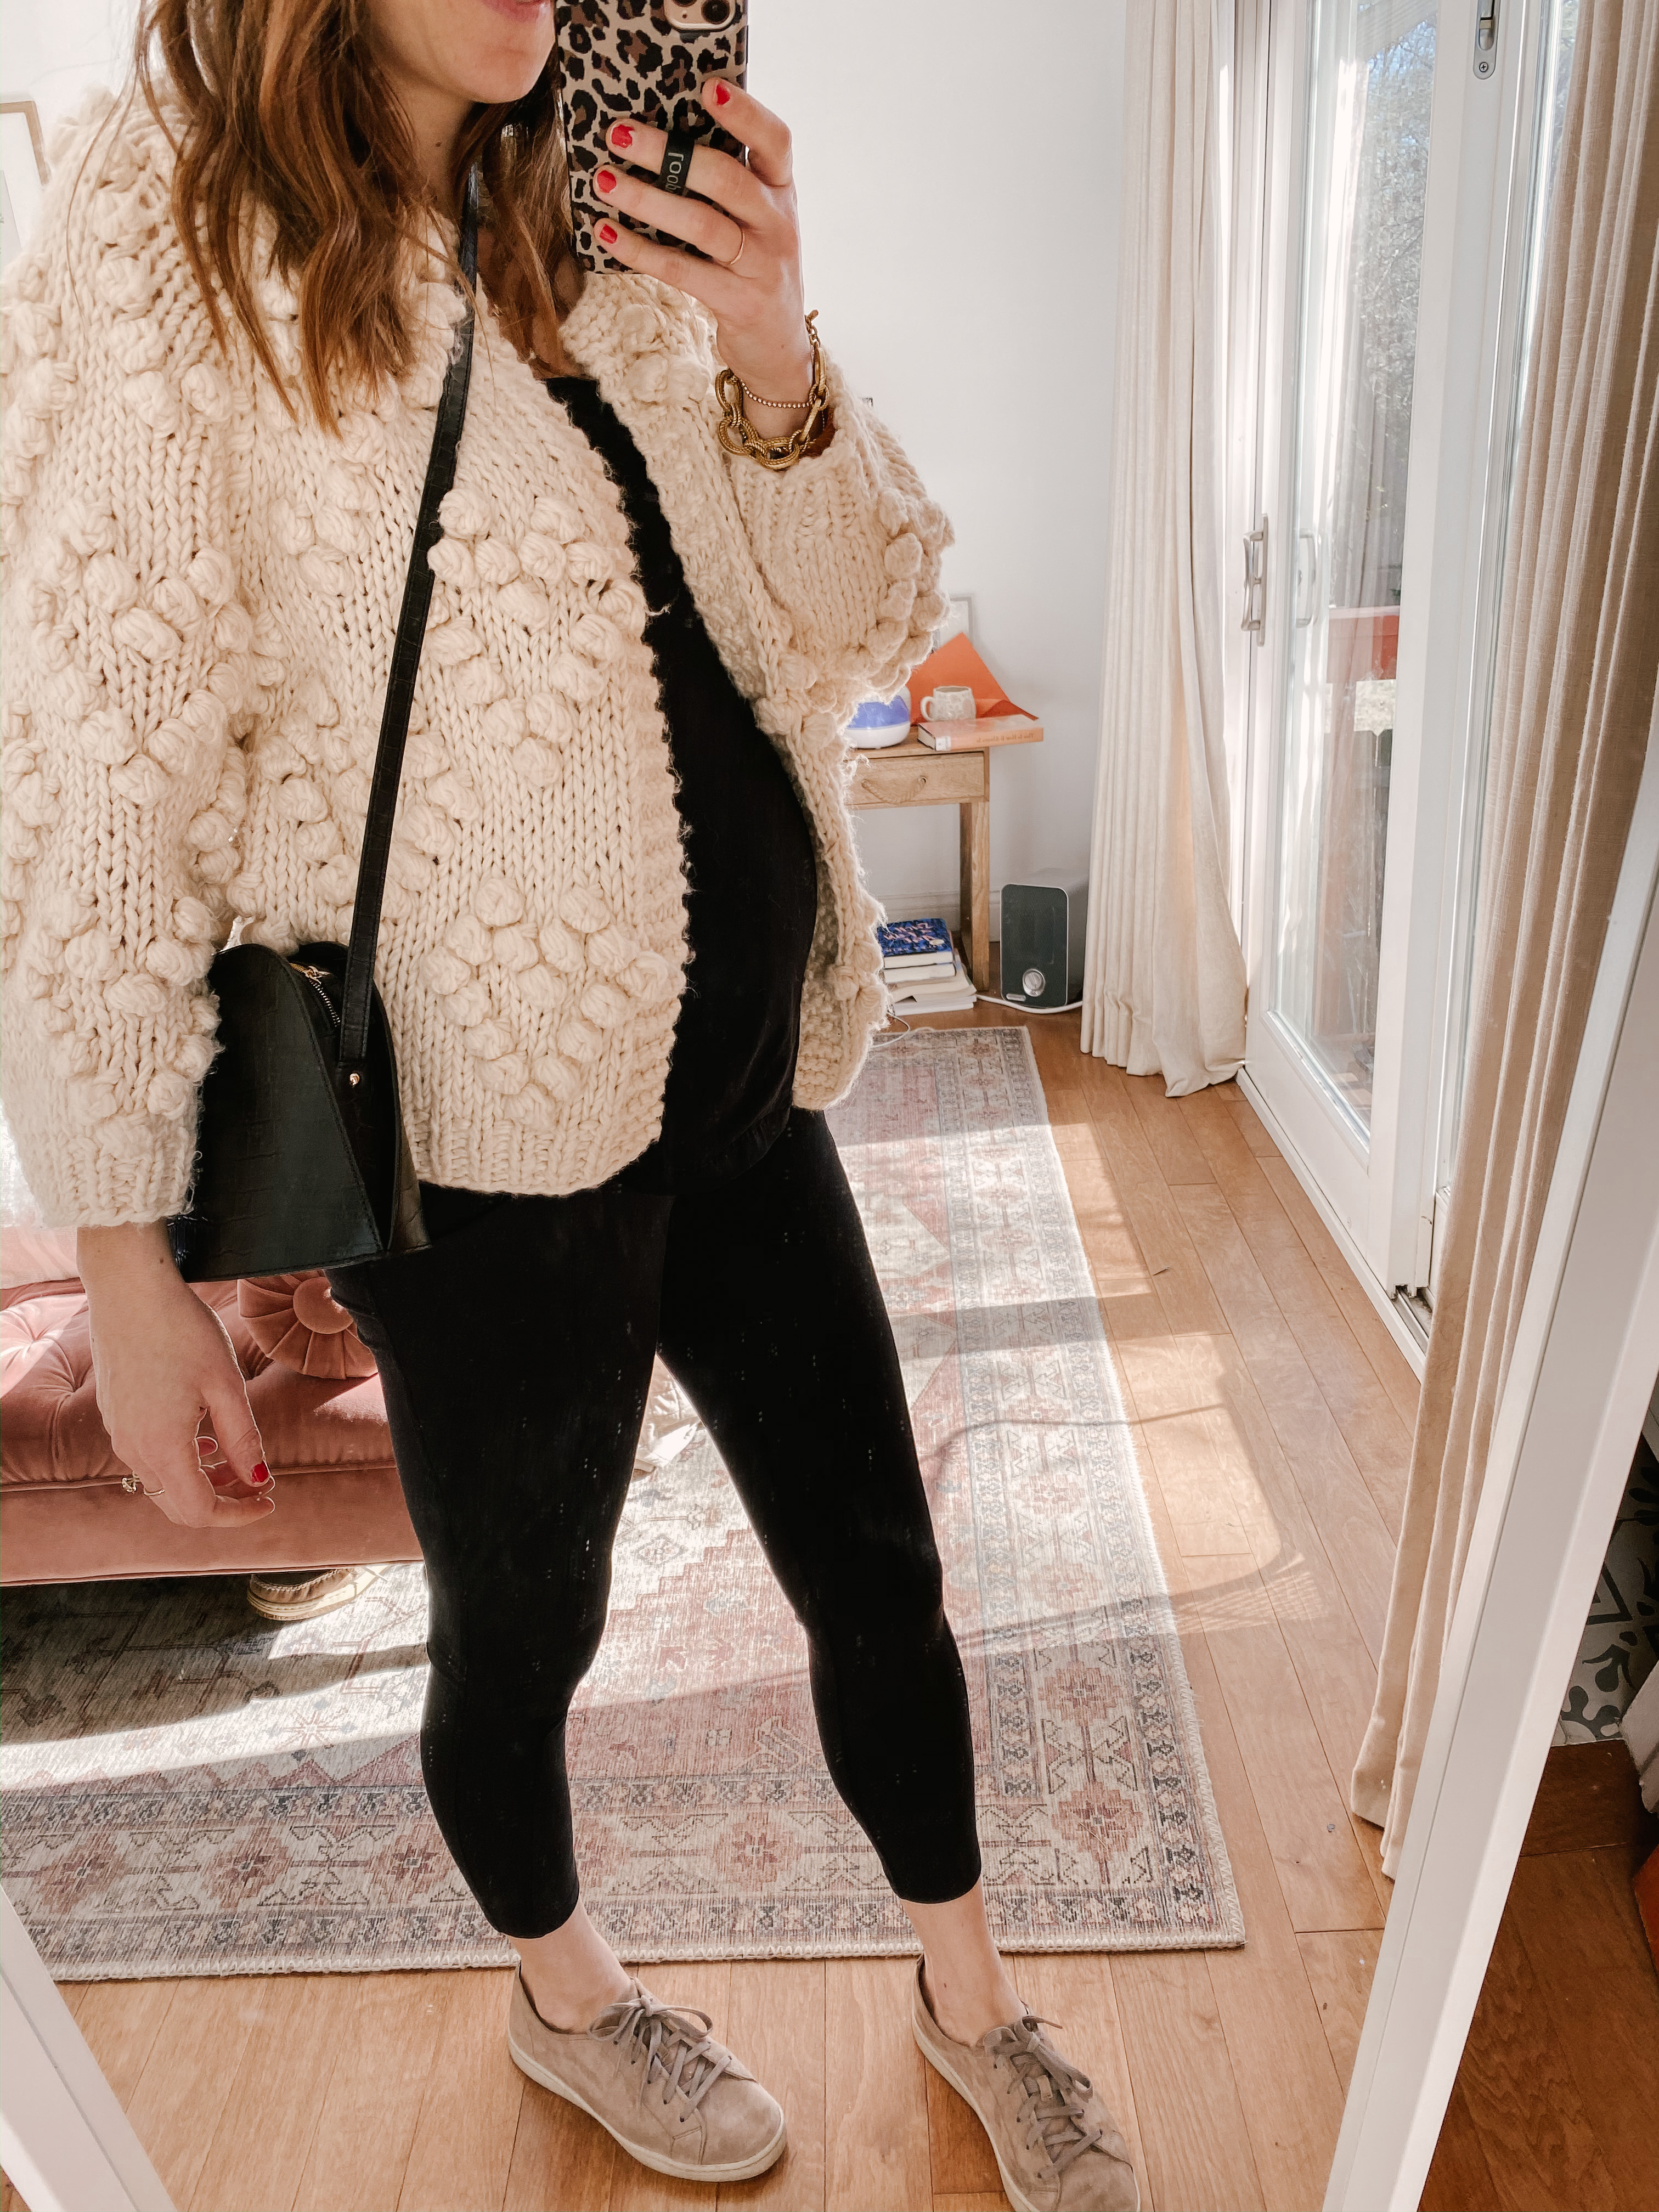 What To Wear To Work With Leggings